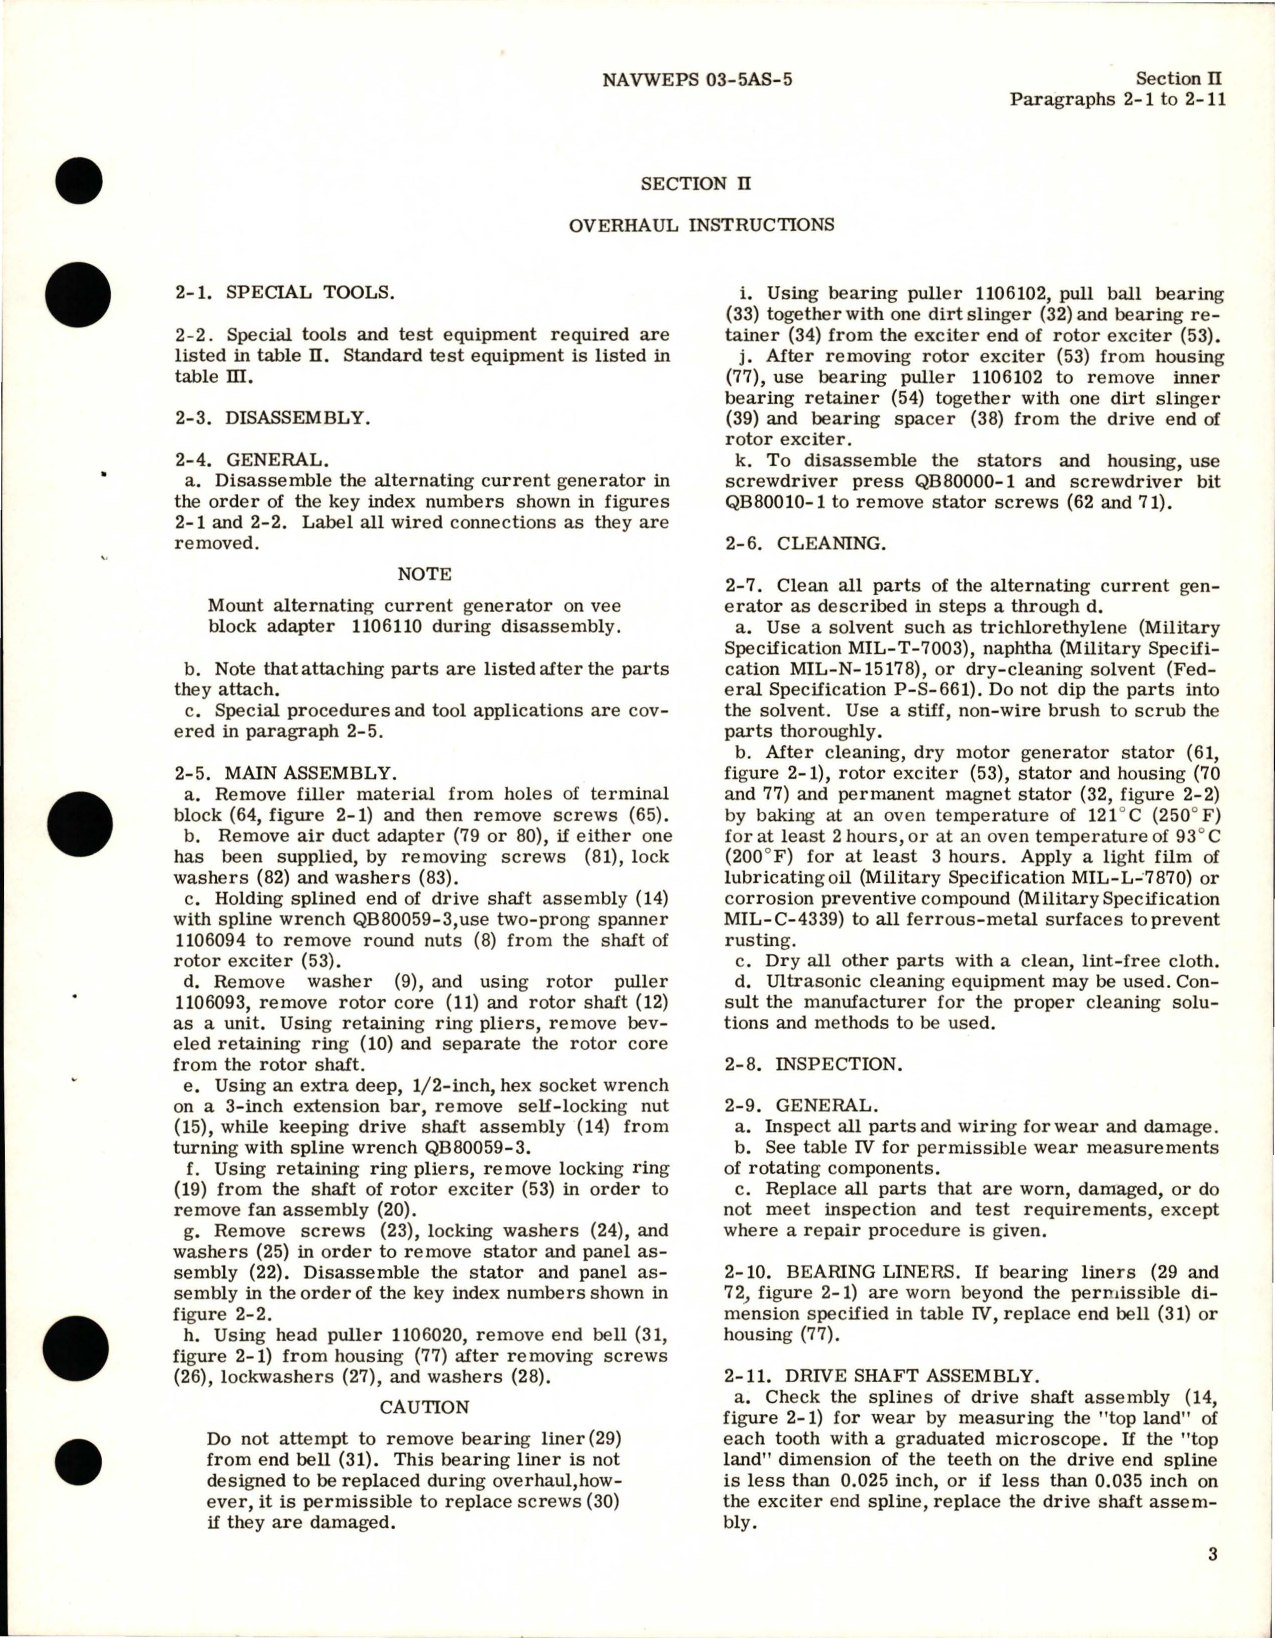 Sample page 7 from AirCorps Library document: Overhaul Instructions for Alternating Current Generator - Types 28B54-1-A and 28B54-9-A 